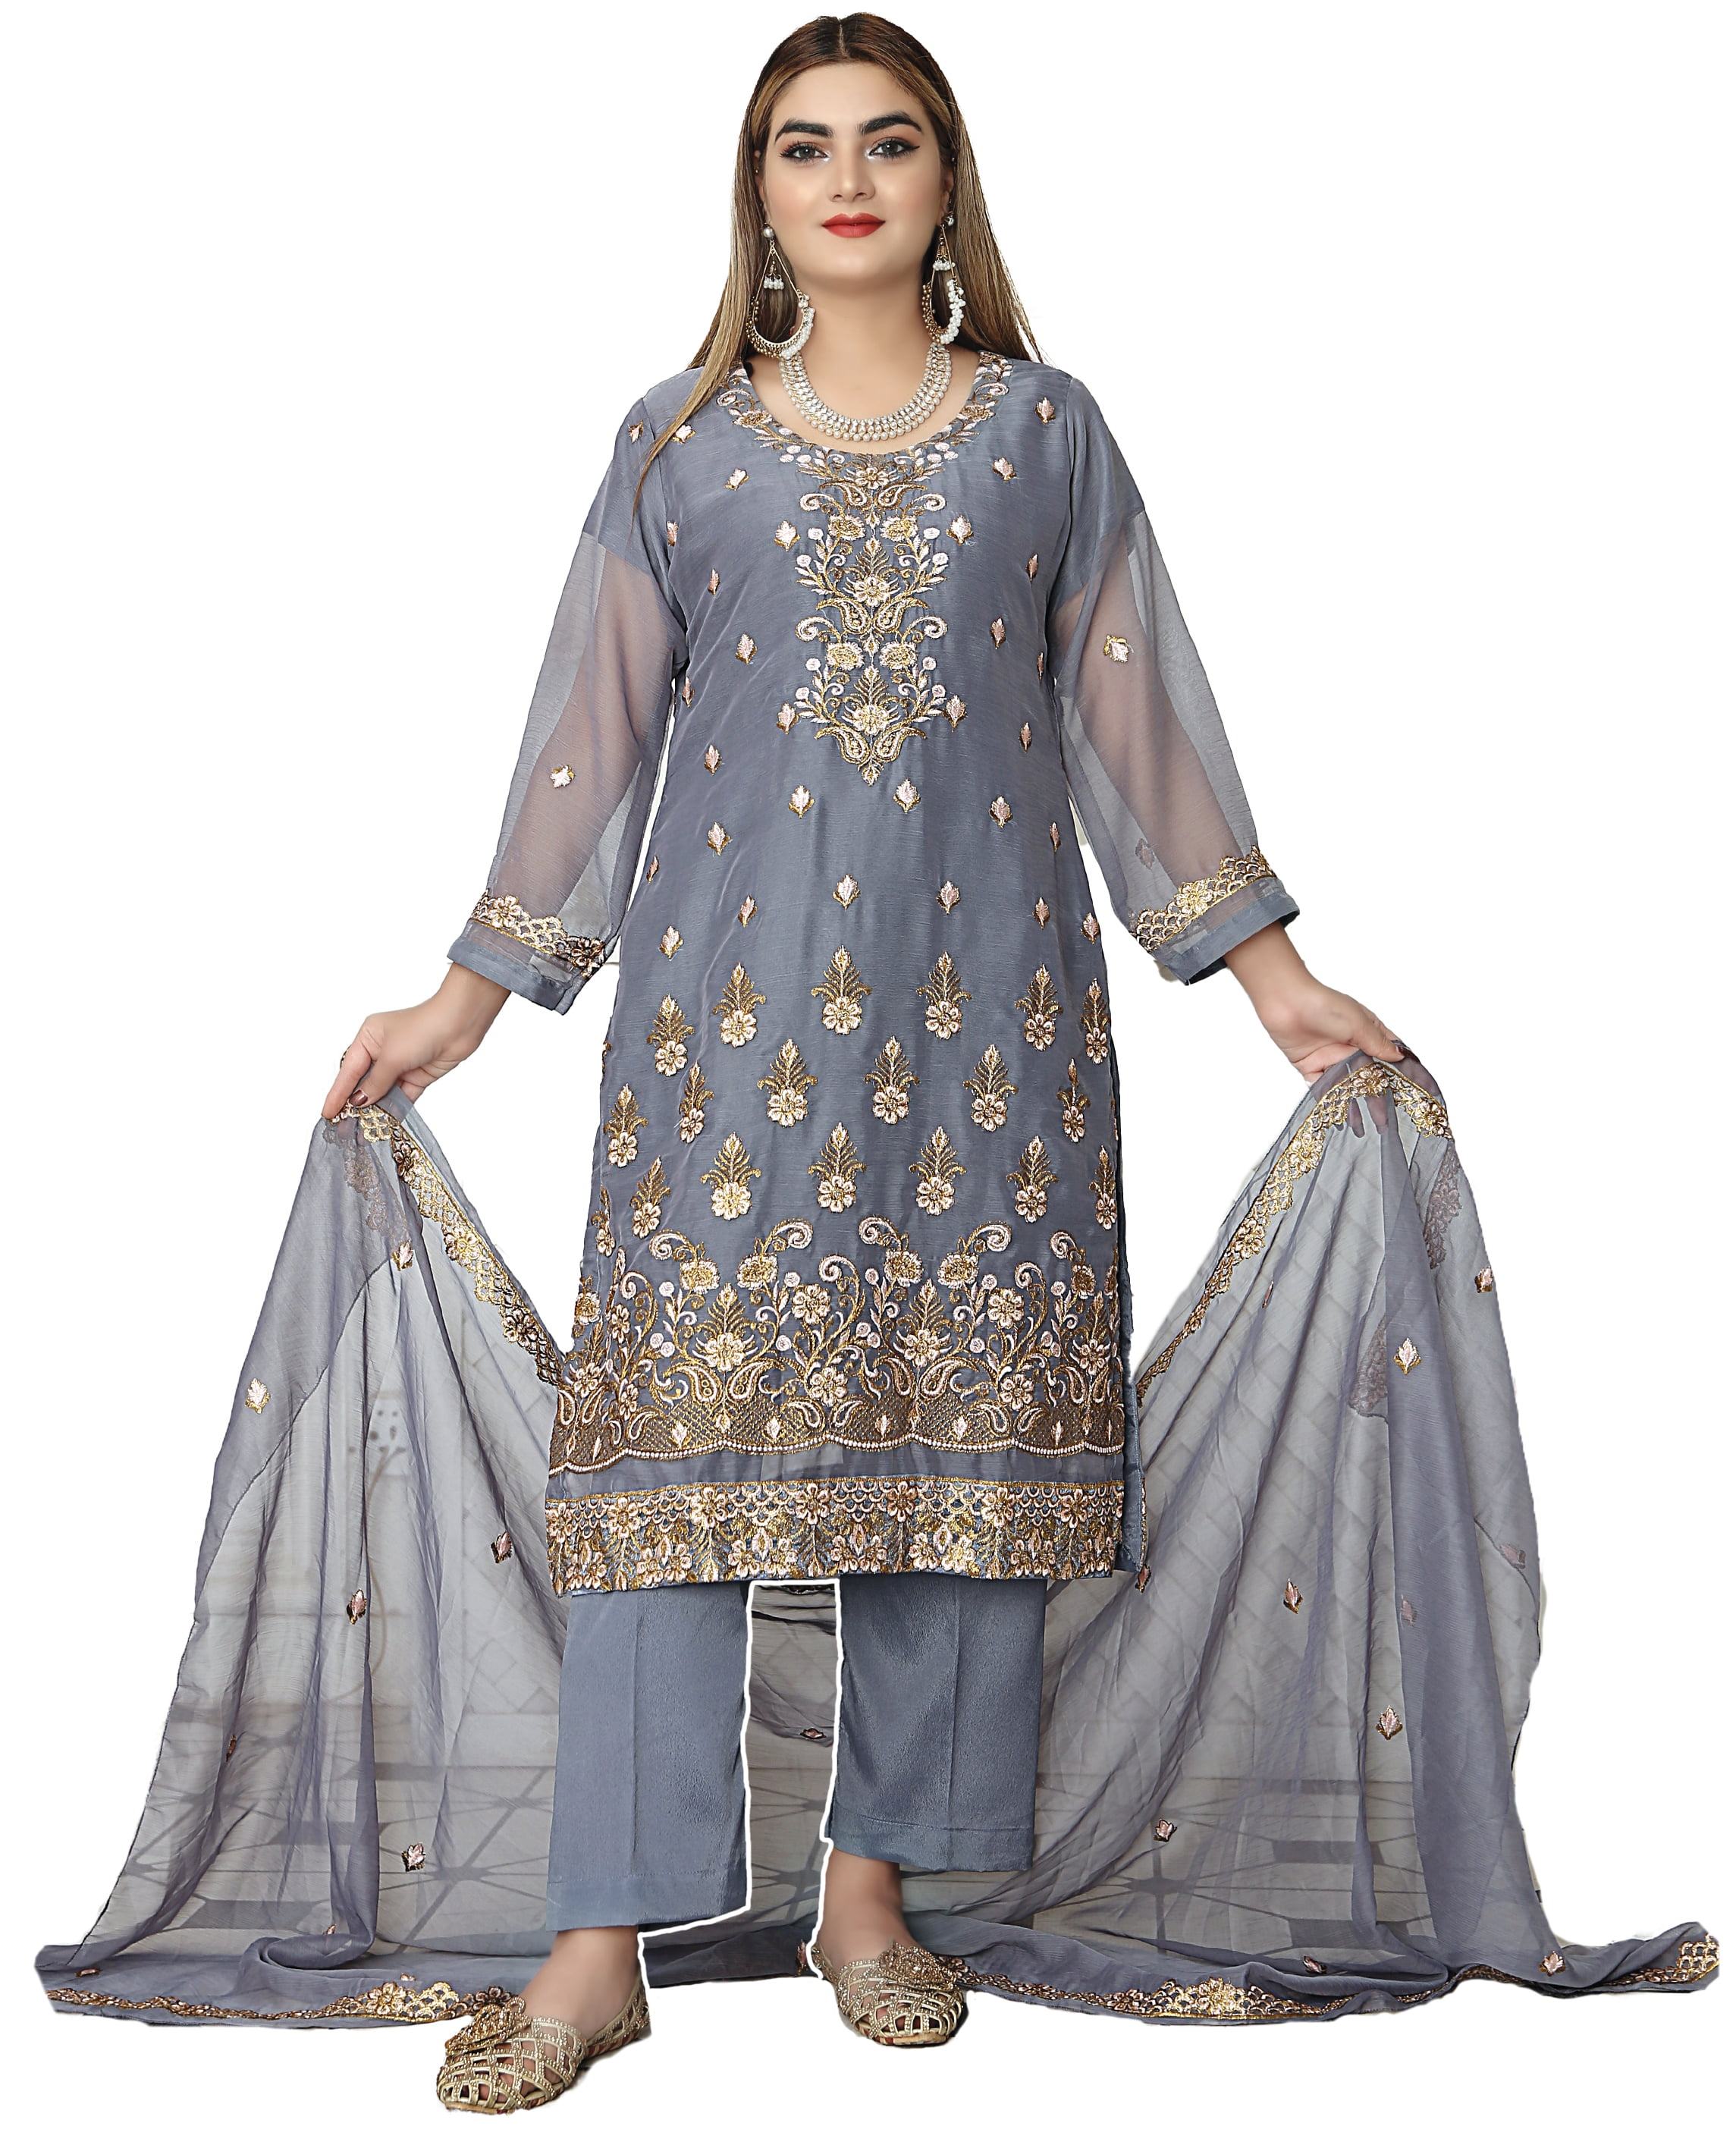 Indian Suits for Women - Readymade Salwar Kameez Online Shopping | G3Fashion